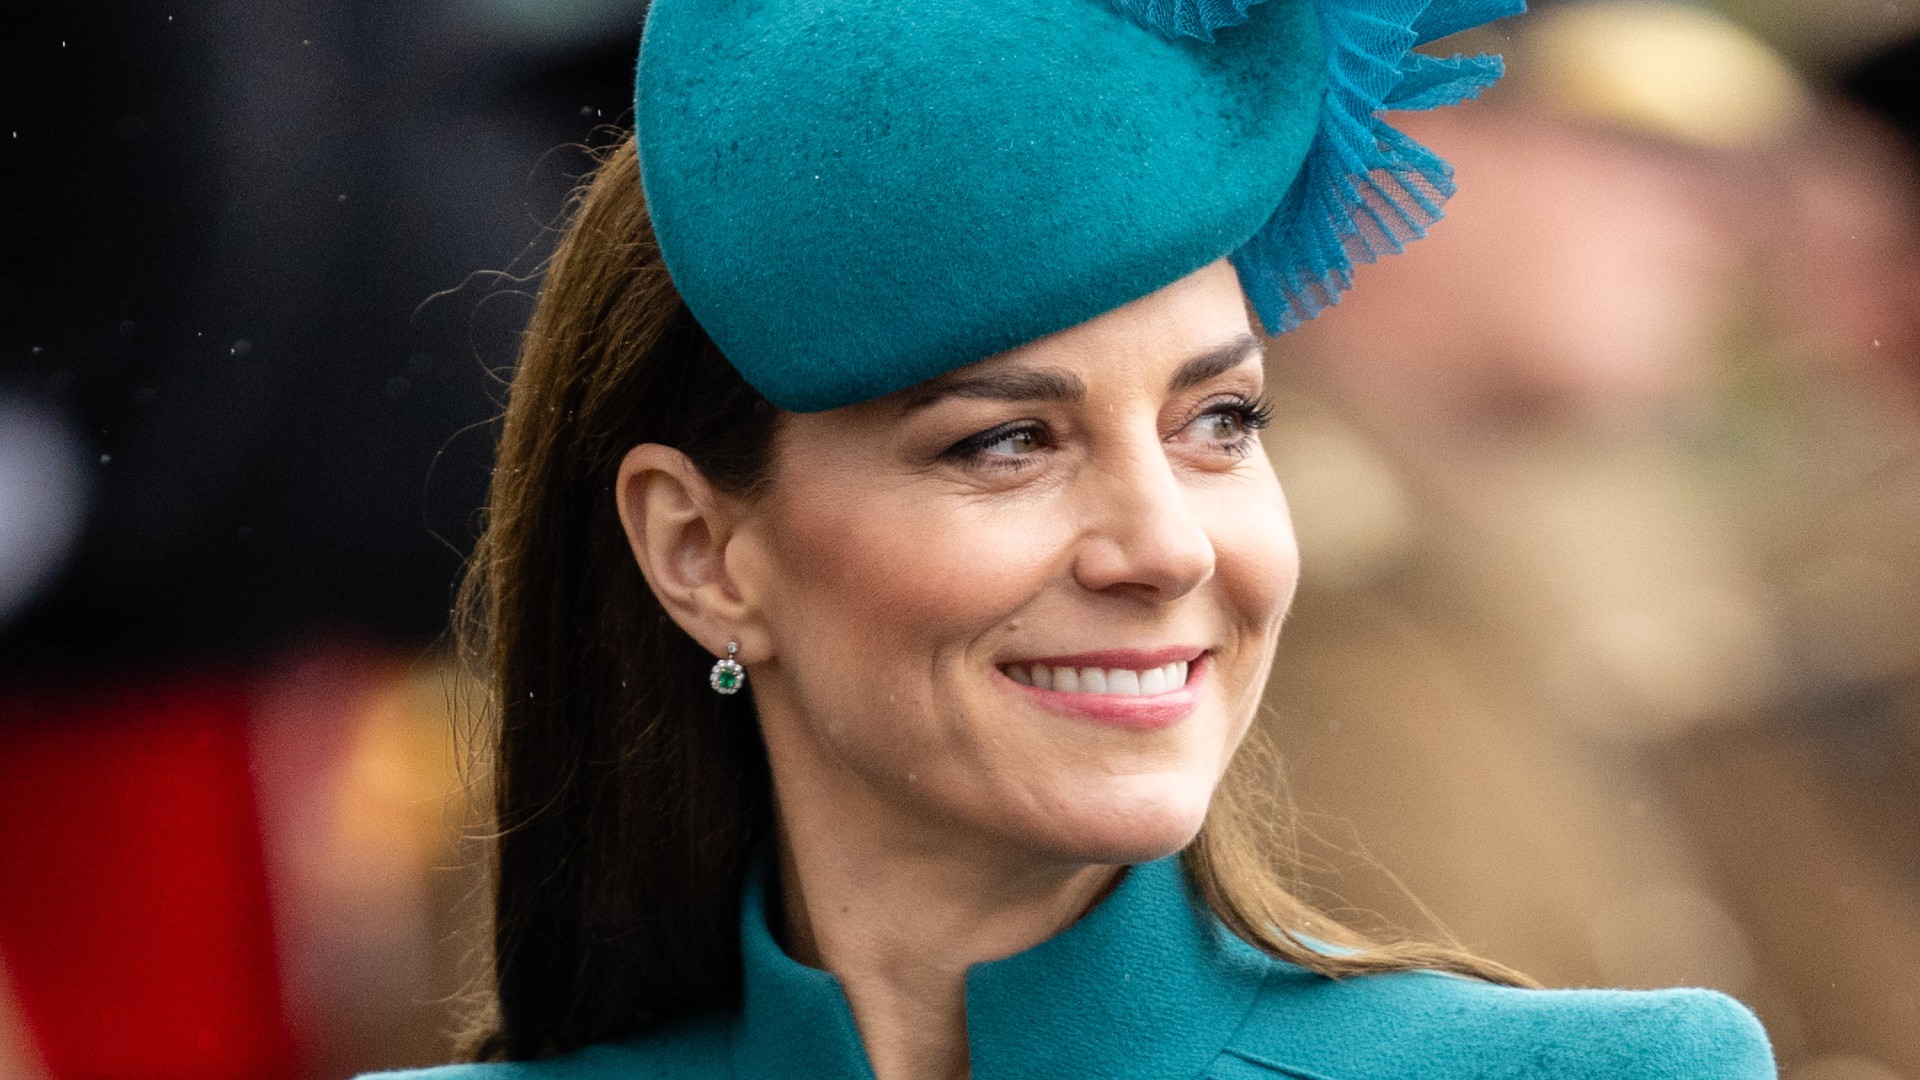 Kate Middleton's Mulberry bag collection will astound you - we